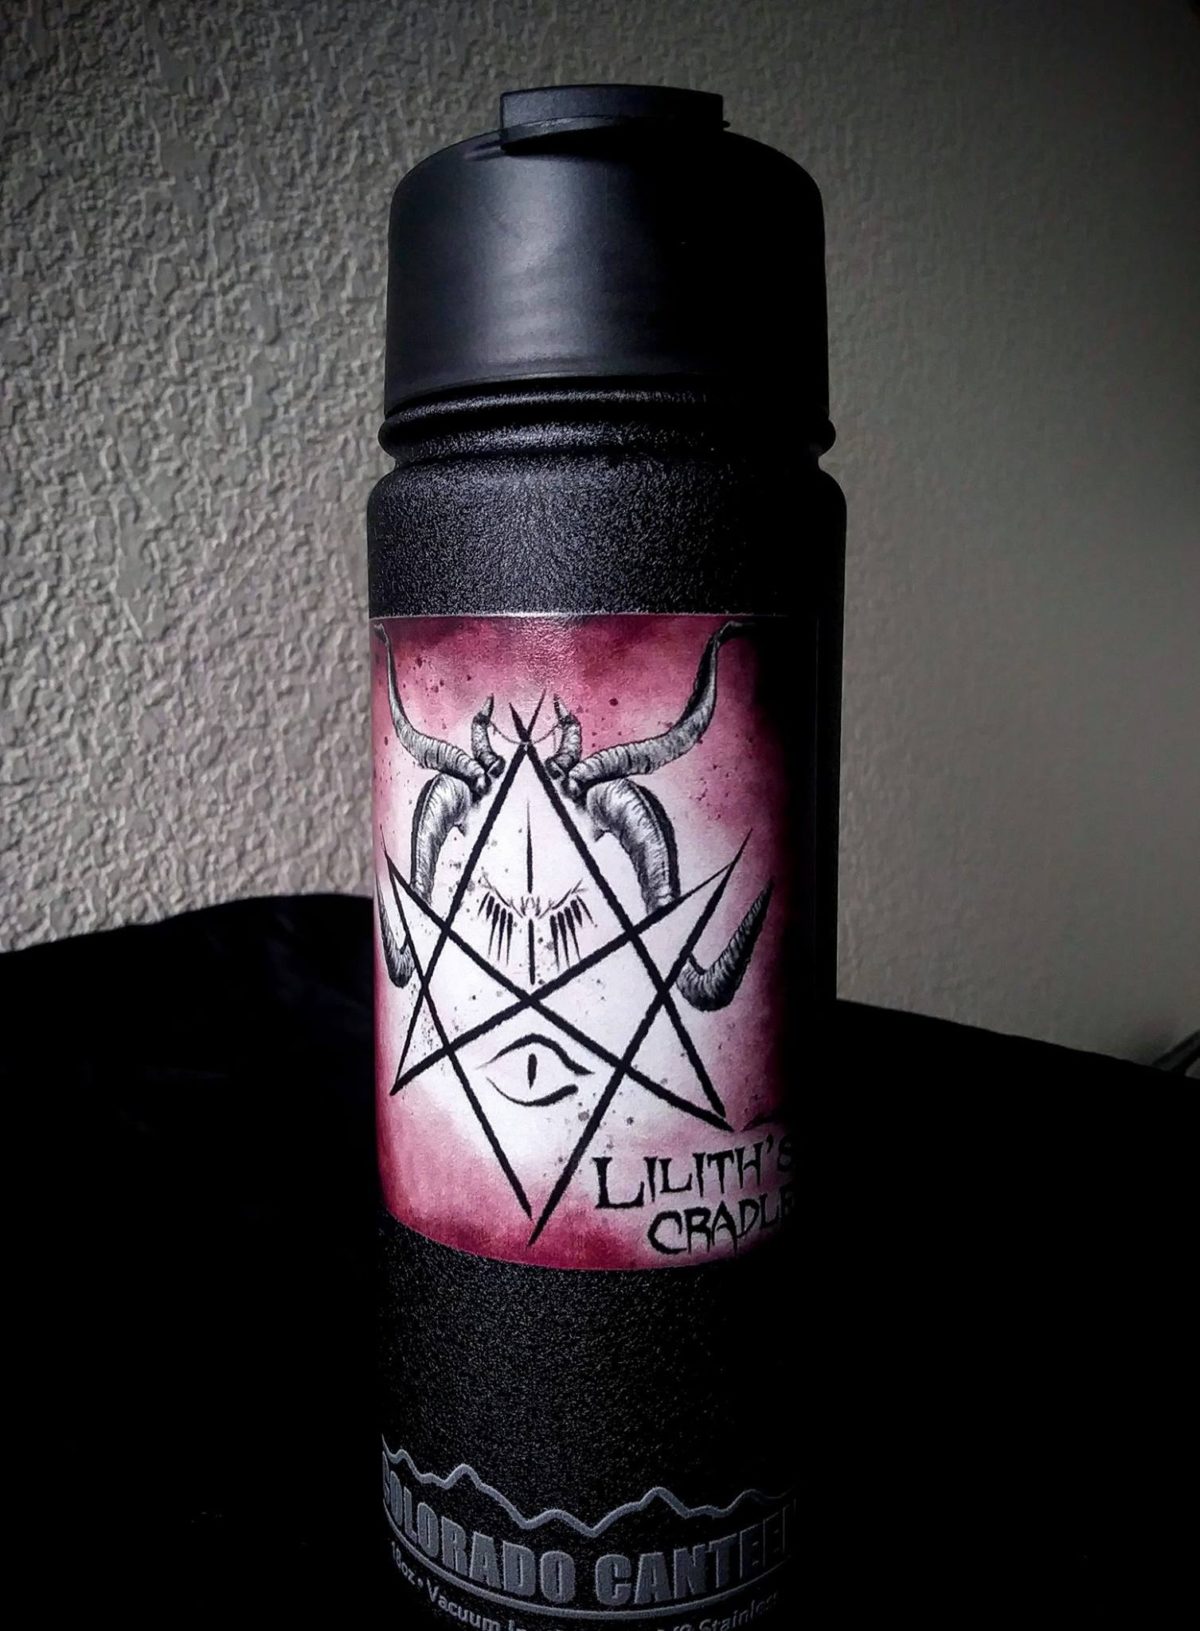 Lilith’s Cradle’s free Bottle Giveaway, details within  .